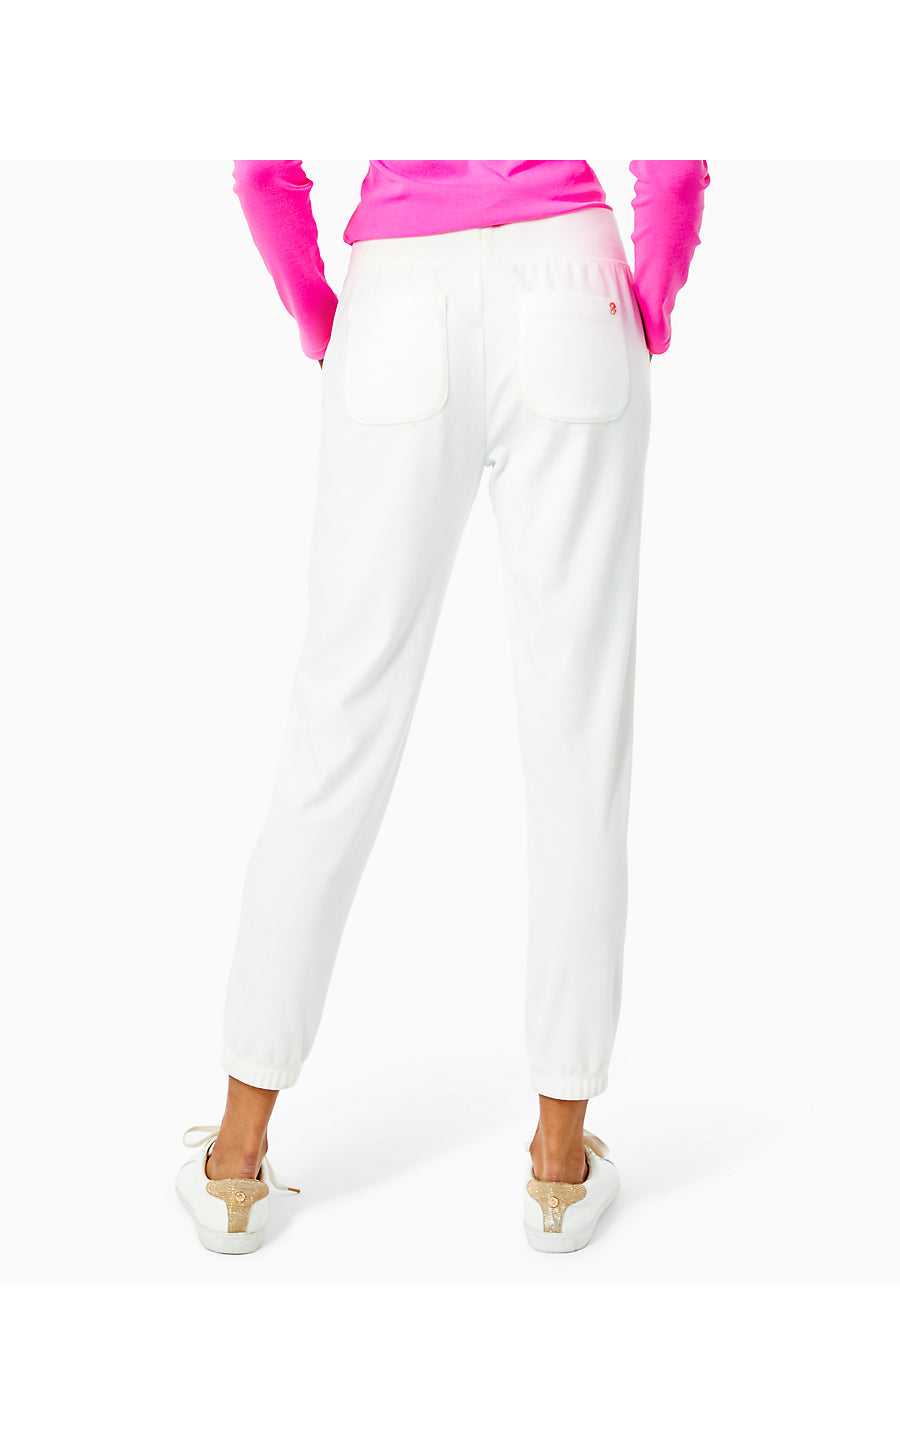 33 Dorsey Velour Pant - Plumeria Pink – The Islands - A Lilly Pulitzer  Signature Store